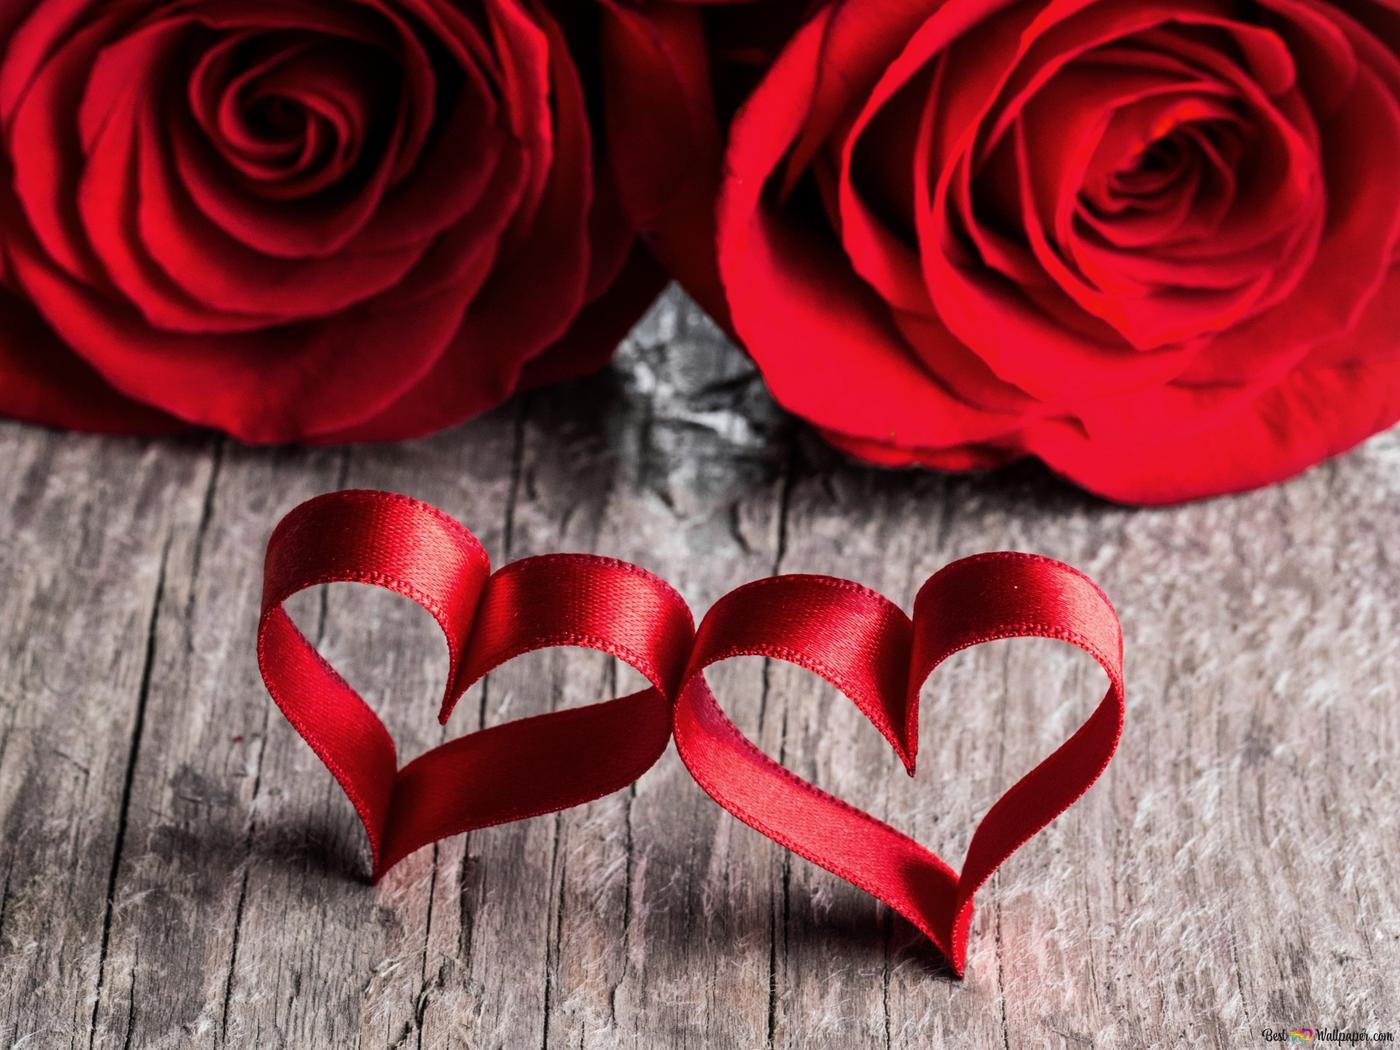 Two red roses and two red hearts on a wooden background - Roses